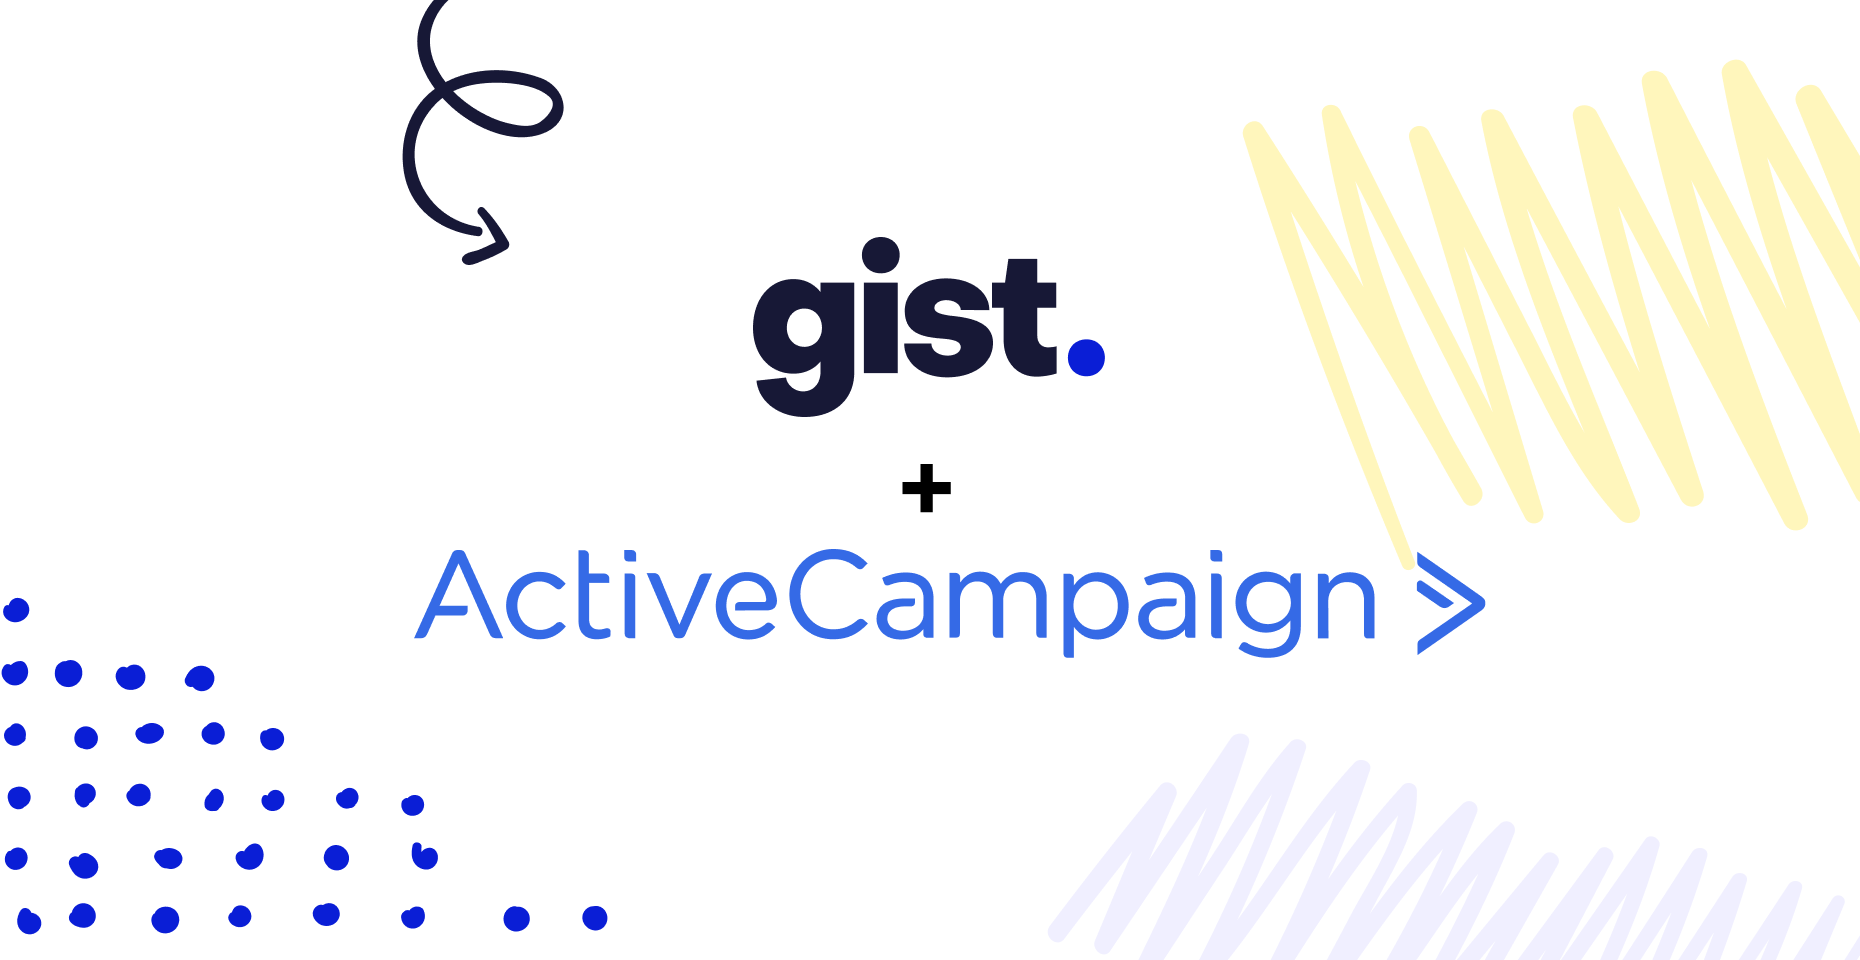 Introducing our ActiveCampaign integration